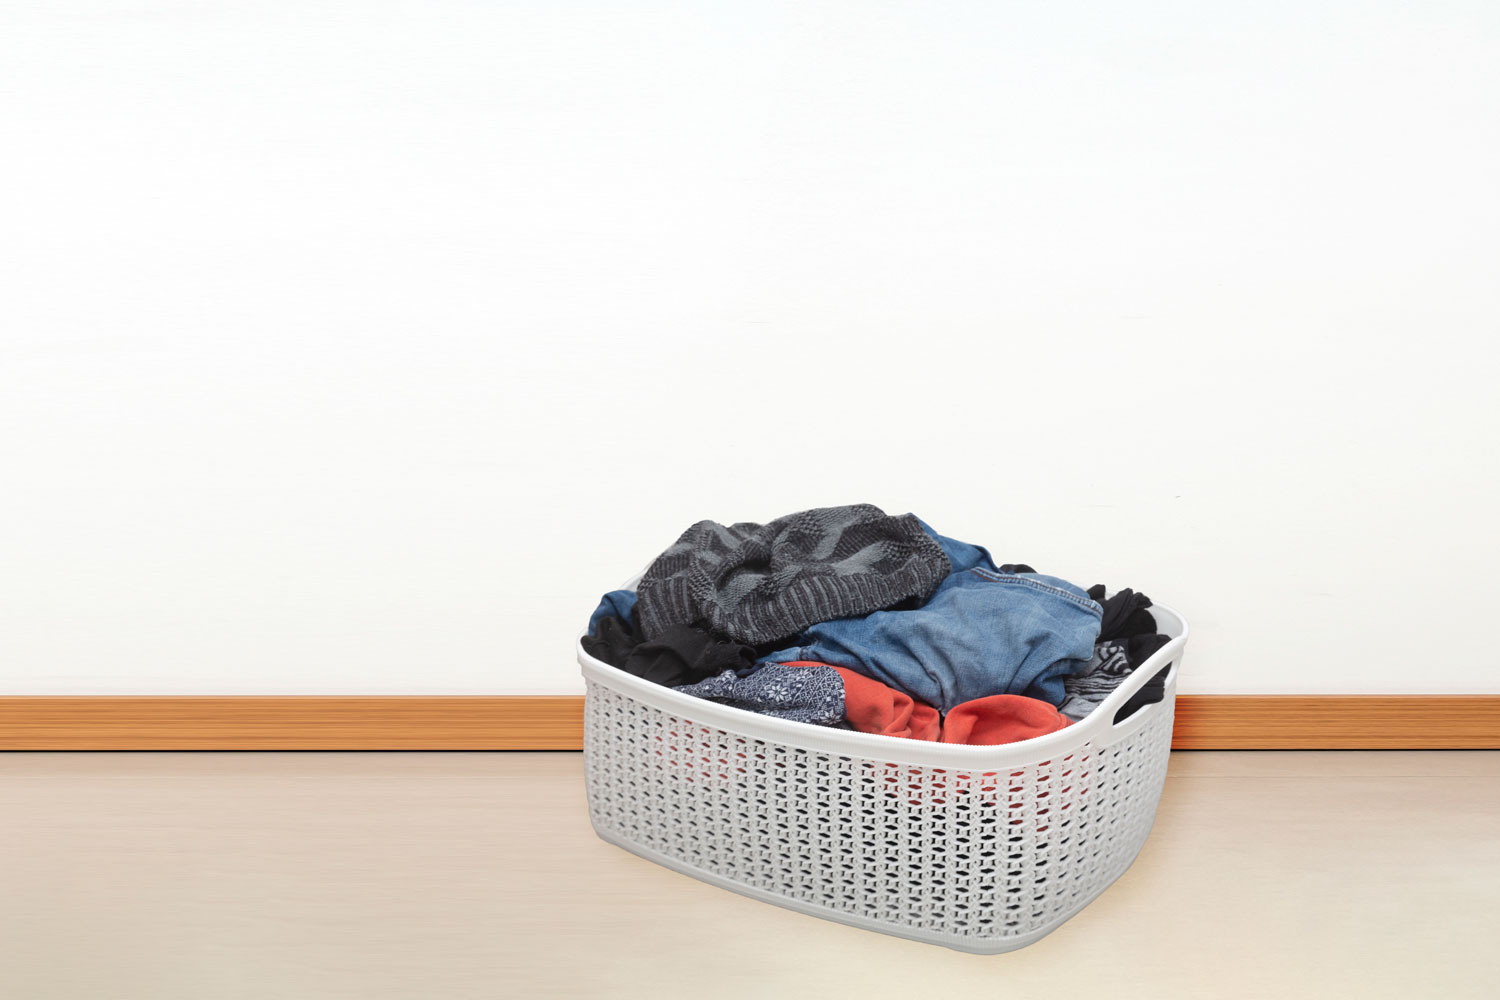 A small laundry basket placed on the side